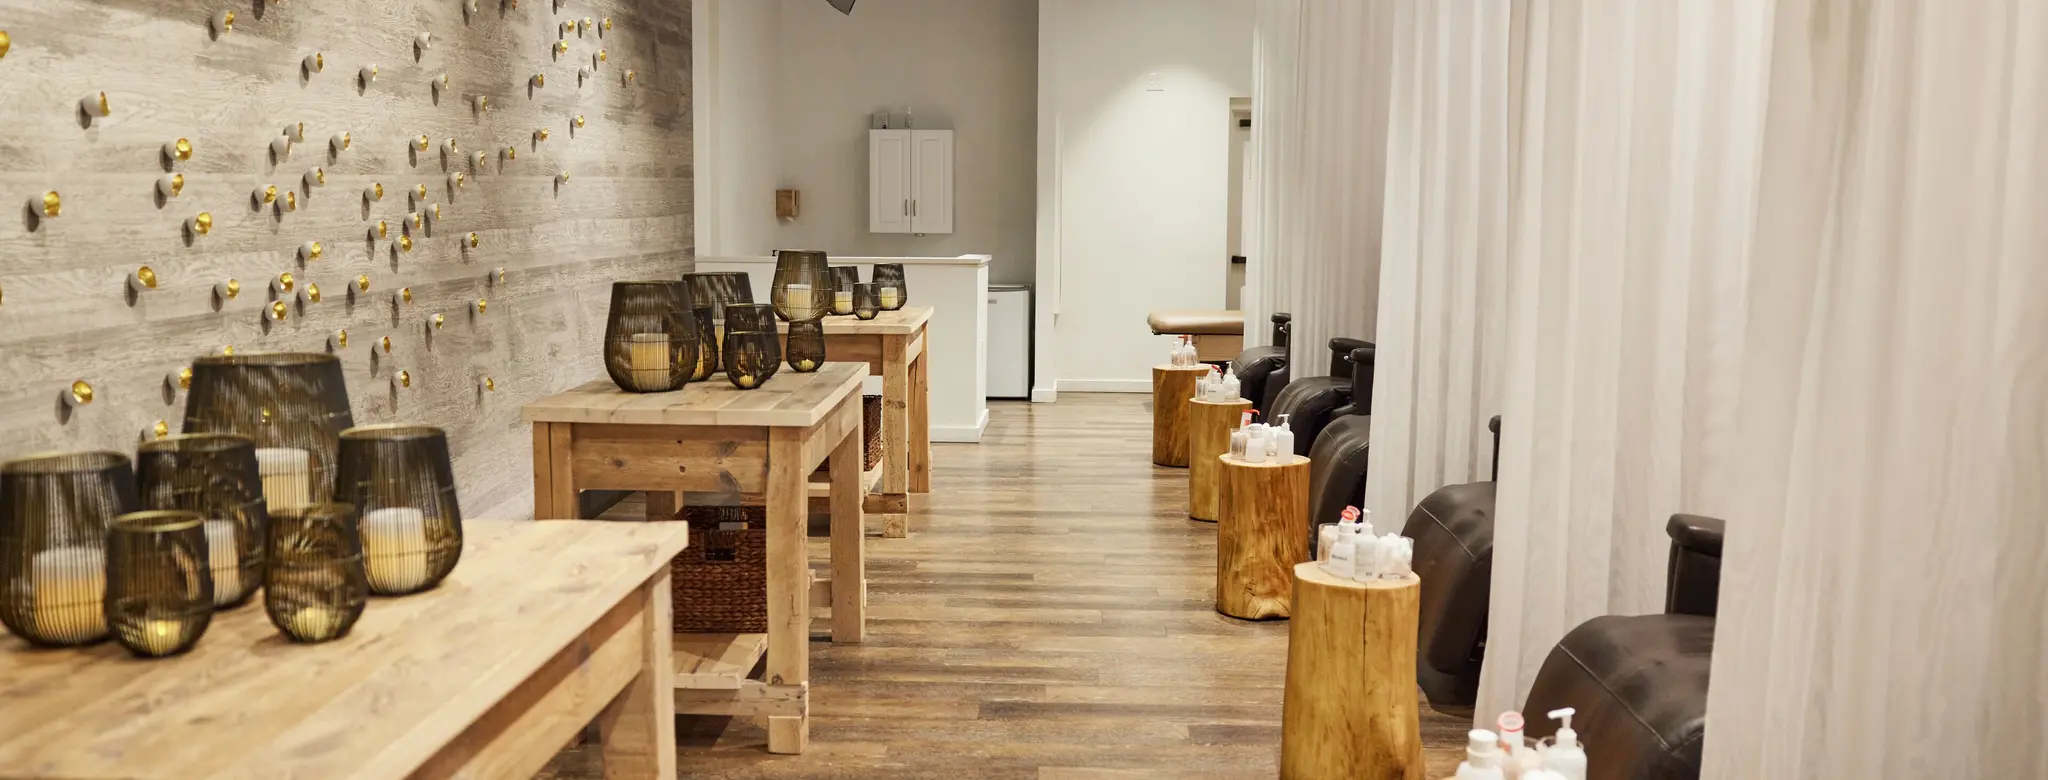 wellness business offering acupuncture with candles 